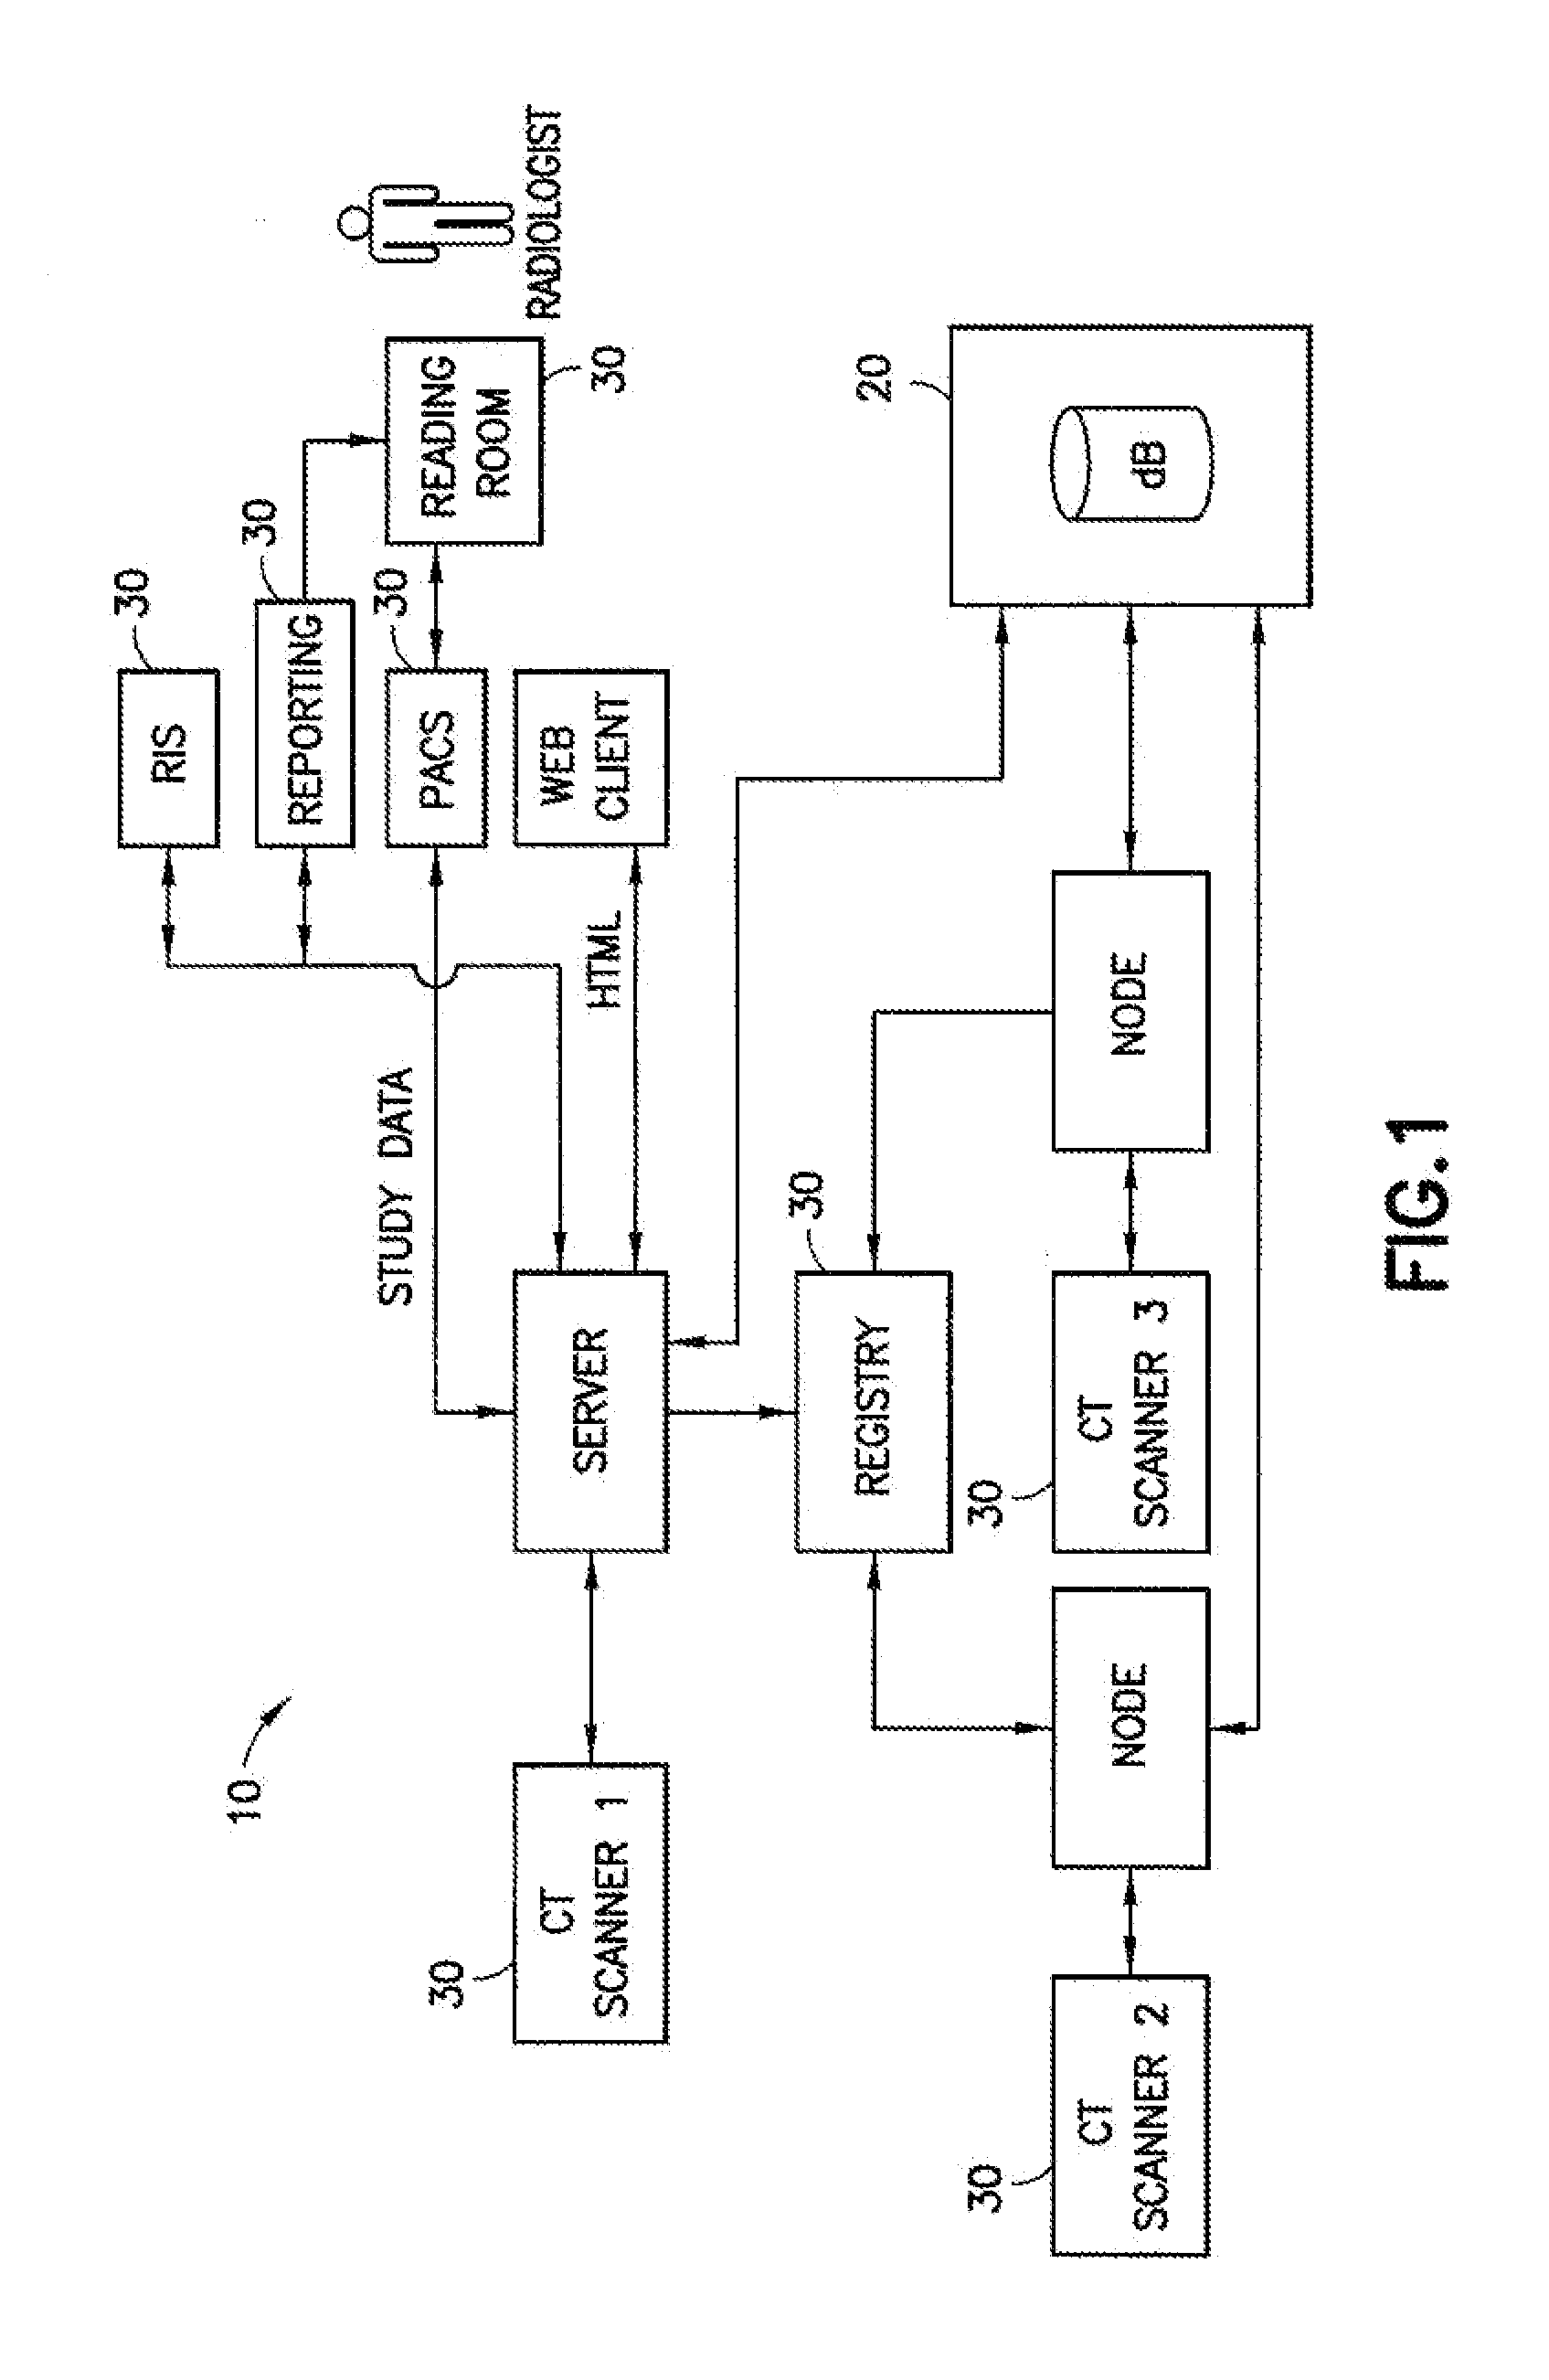 Methods and Techniques for Collecting, Reporting and Managing Ionizing Radiation Dose